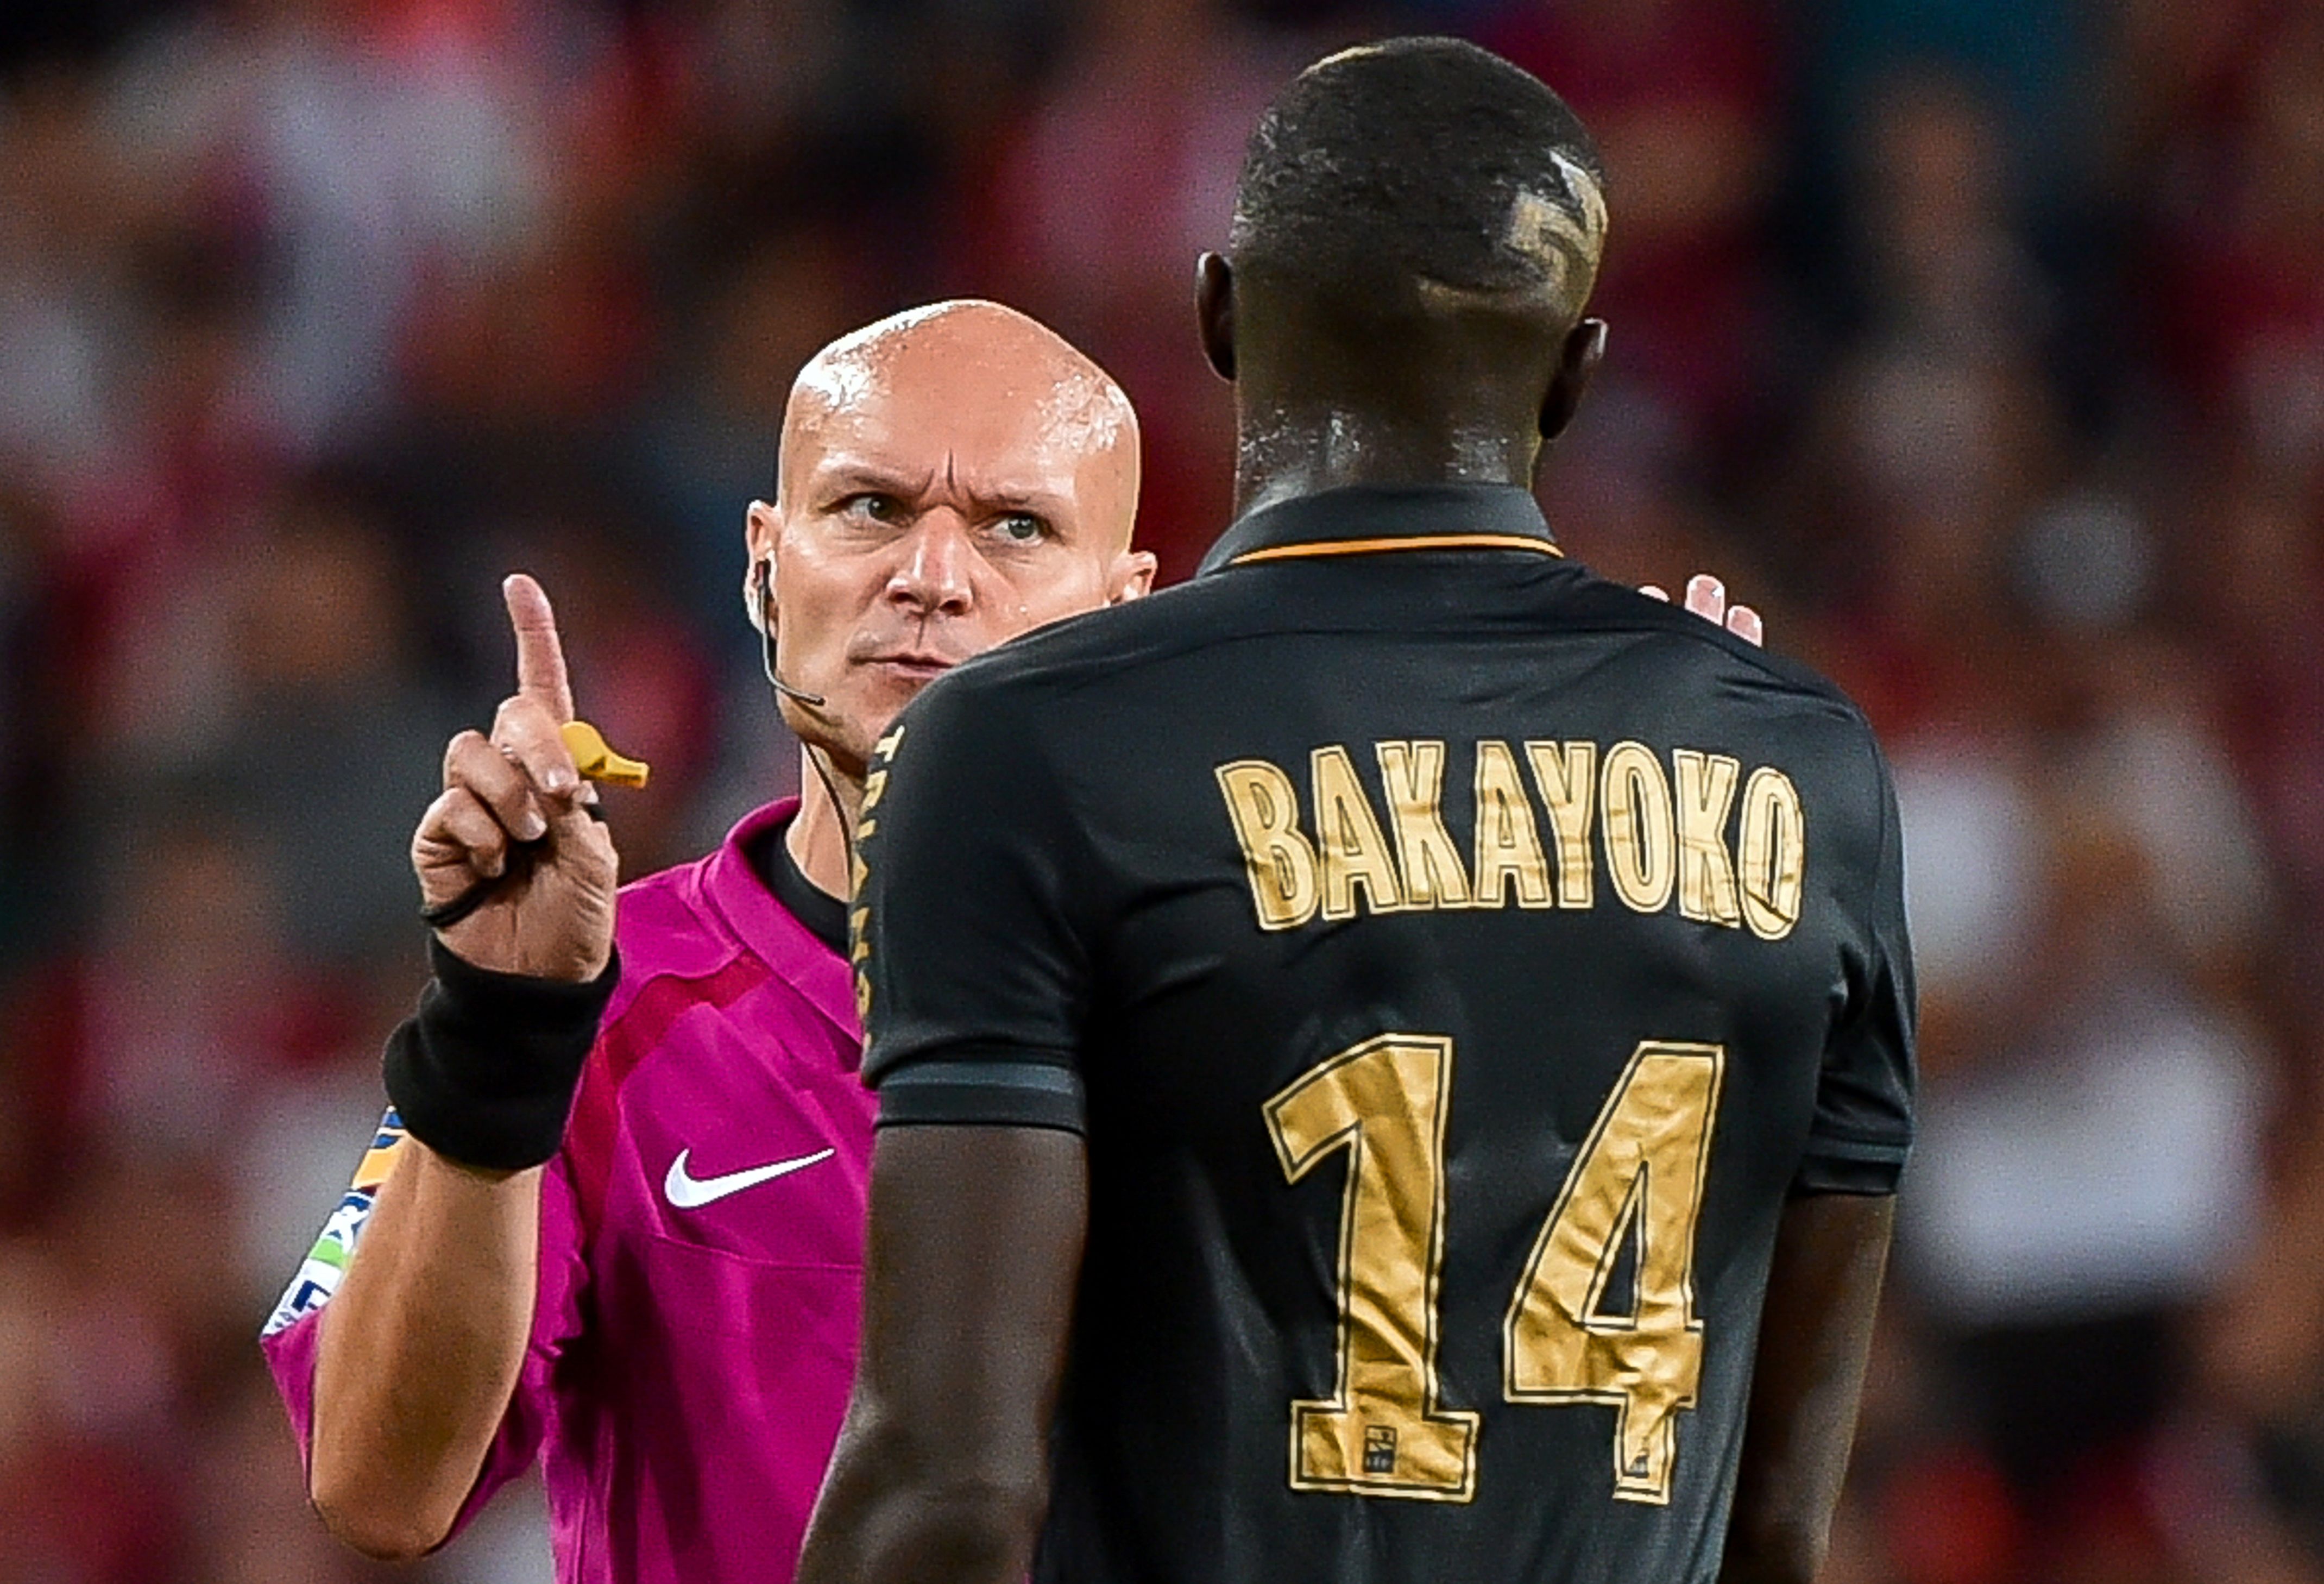 Chief arbiter Tony Chapron (L) argues with Monaco's French midfielder Tiemoue Bakayoko (R) during the French L1 football match between Lille OSC (LOSC) and AS Monaco FC (ASMFC) at the Pierre-Mauroy Stadium in Villeneuve d'Ascq, near Lille, northern France, on September 10, 2016. / AFP / PHILIPPE HUGUEN        (Photo credit should read PHILIPPE HUGUEN/AFP/Getty Images)